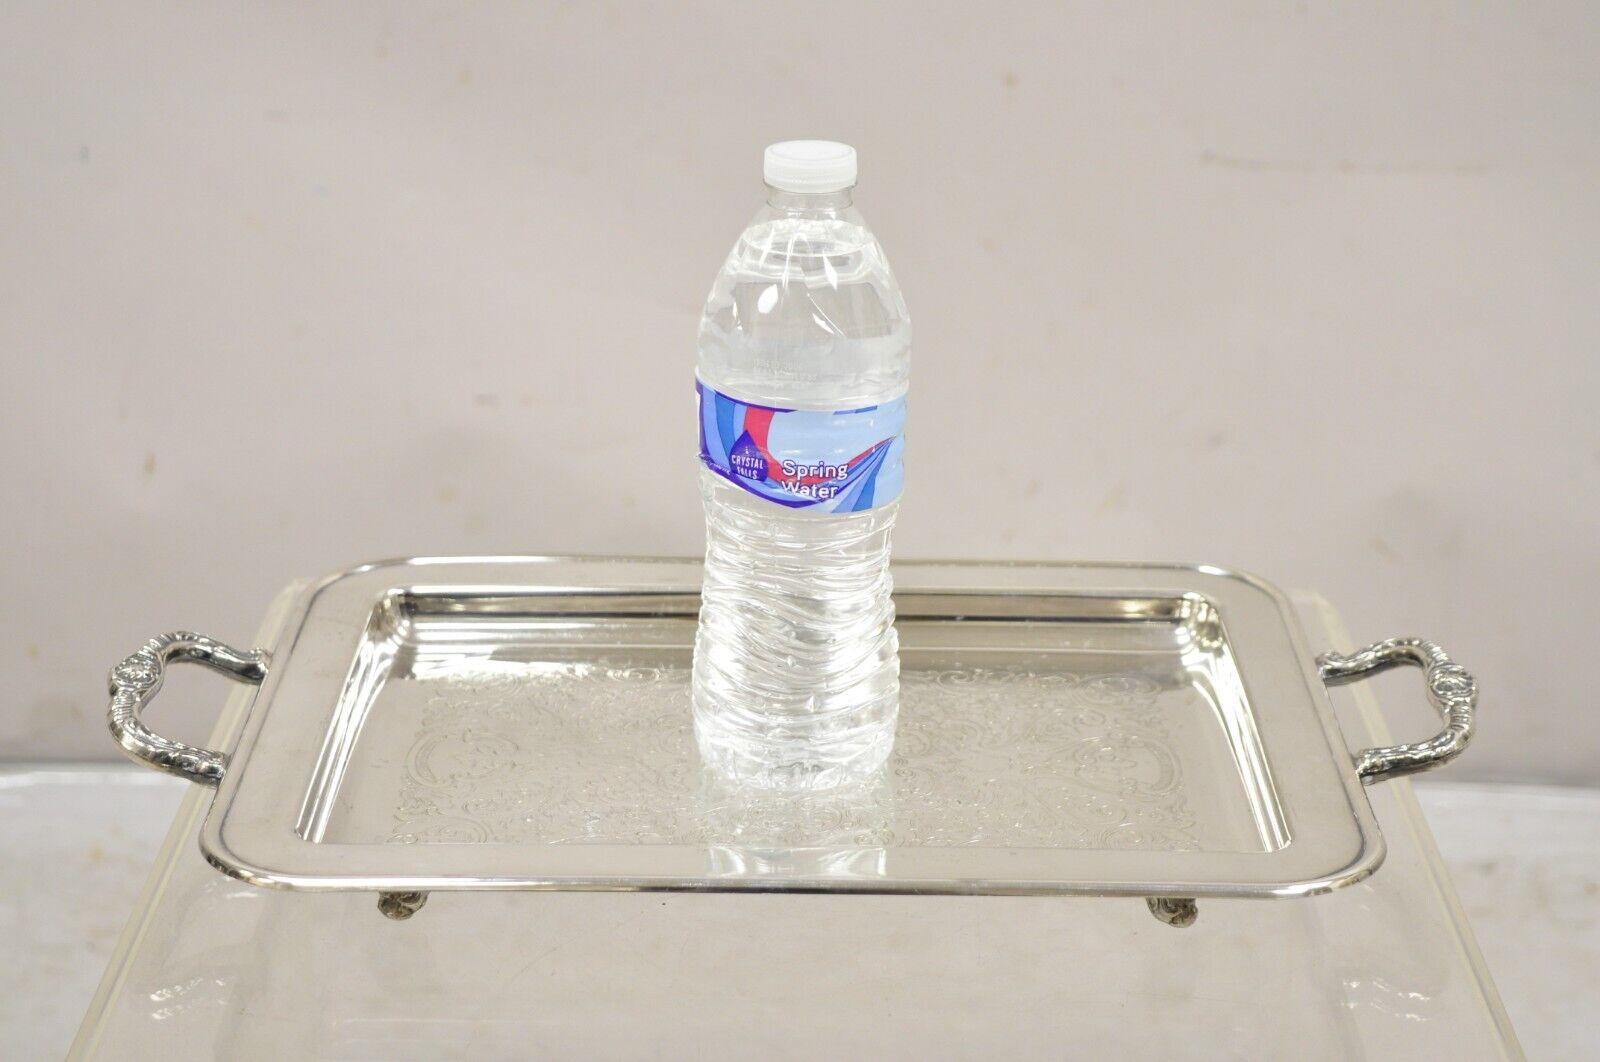 Vintage Leonard Small Silver Plated Twin Handle Serving Platter Tray. Circa Late 20th Century. Measurements: 2